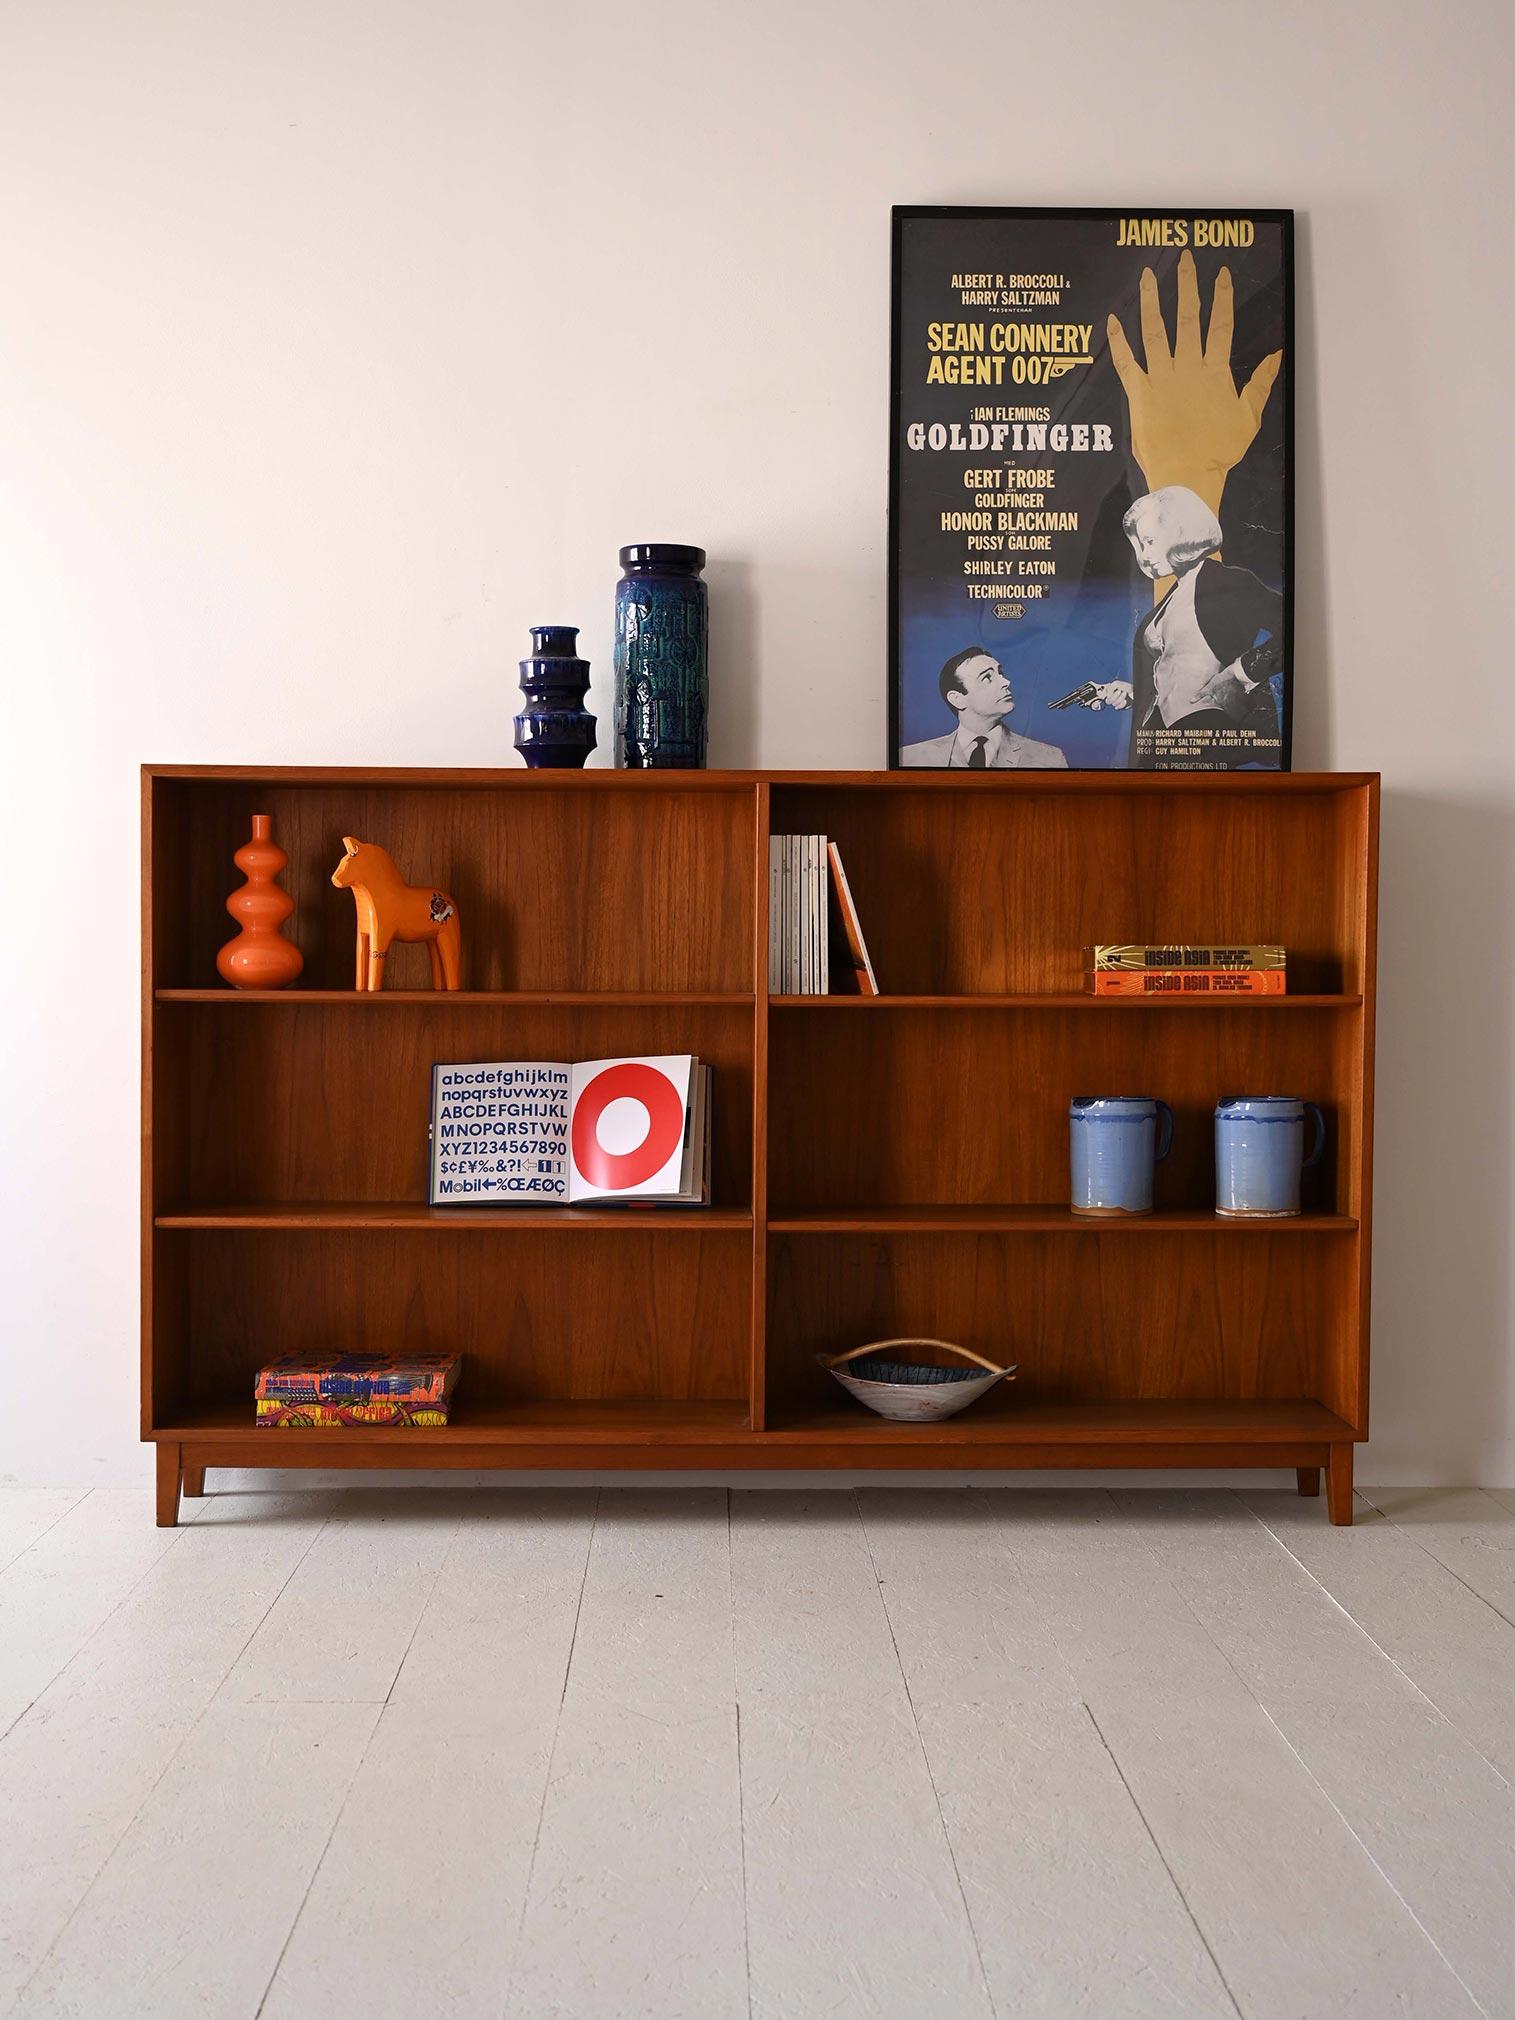 1960s Scandinavian bookcase.

This piece of furniture is an example of clean, functional design that characterizes the era of modernism. Its teak wood frame, features shelves of various sizes that allow versatile display of objects and books, while